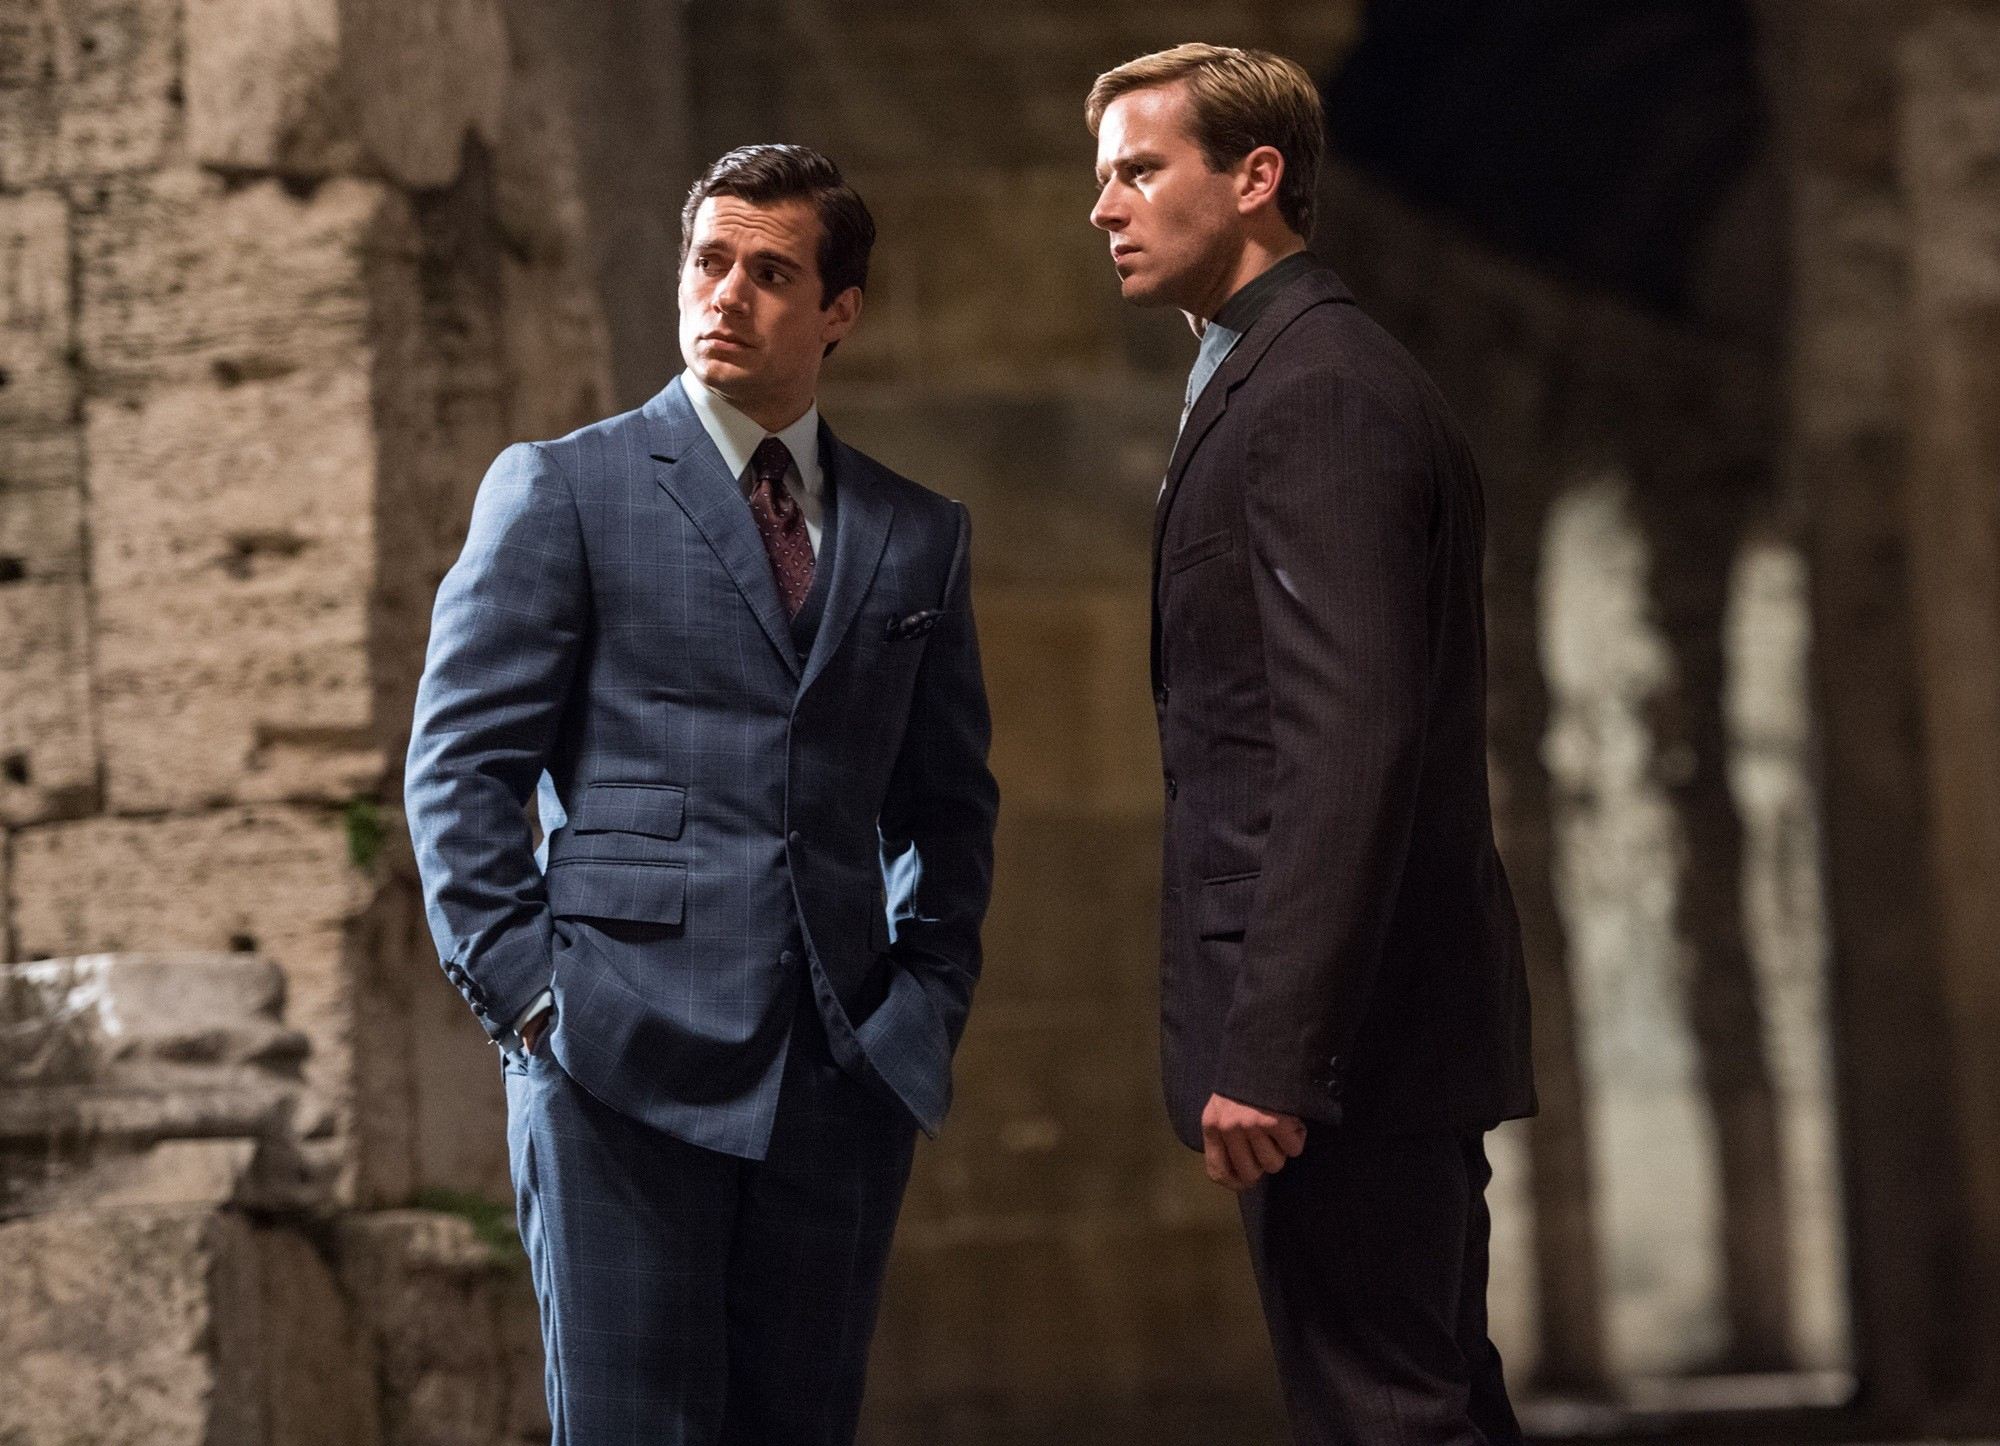 Henry Cavill stars as Napoleon Solo and Armie Hammer stars as Illya Kuryakin in Warner Bros. Pictures' The Man from U.N.C.L.E. (2015)